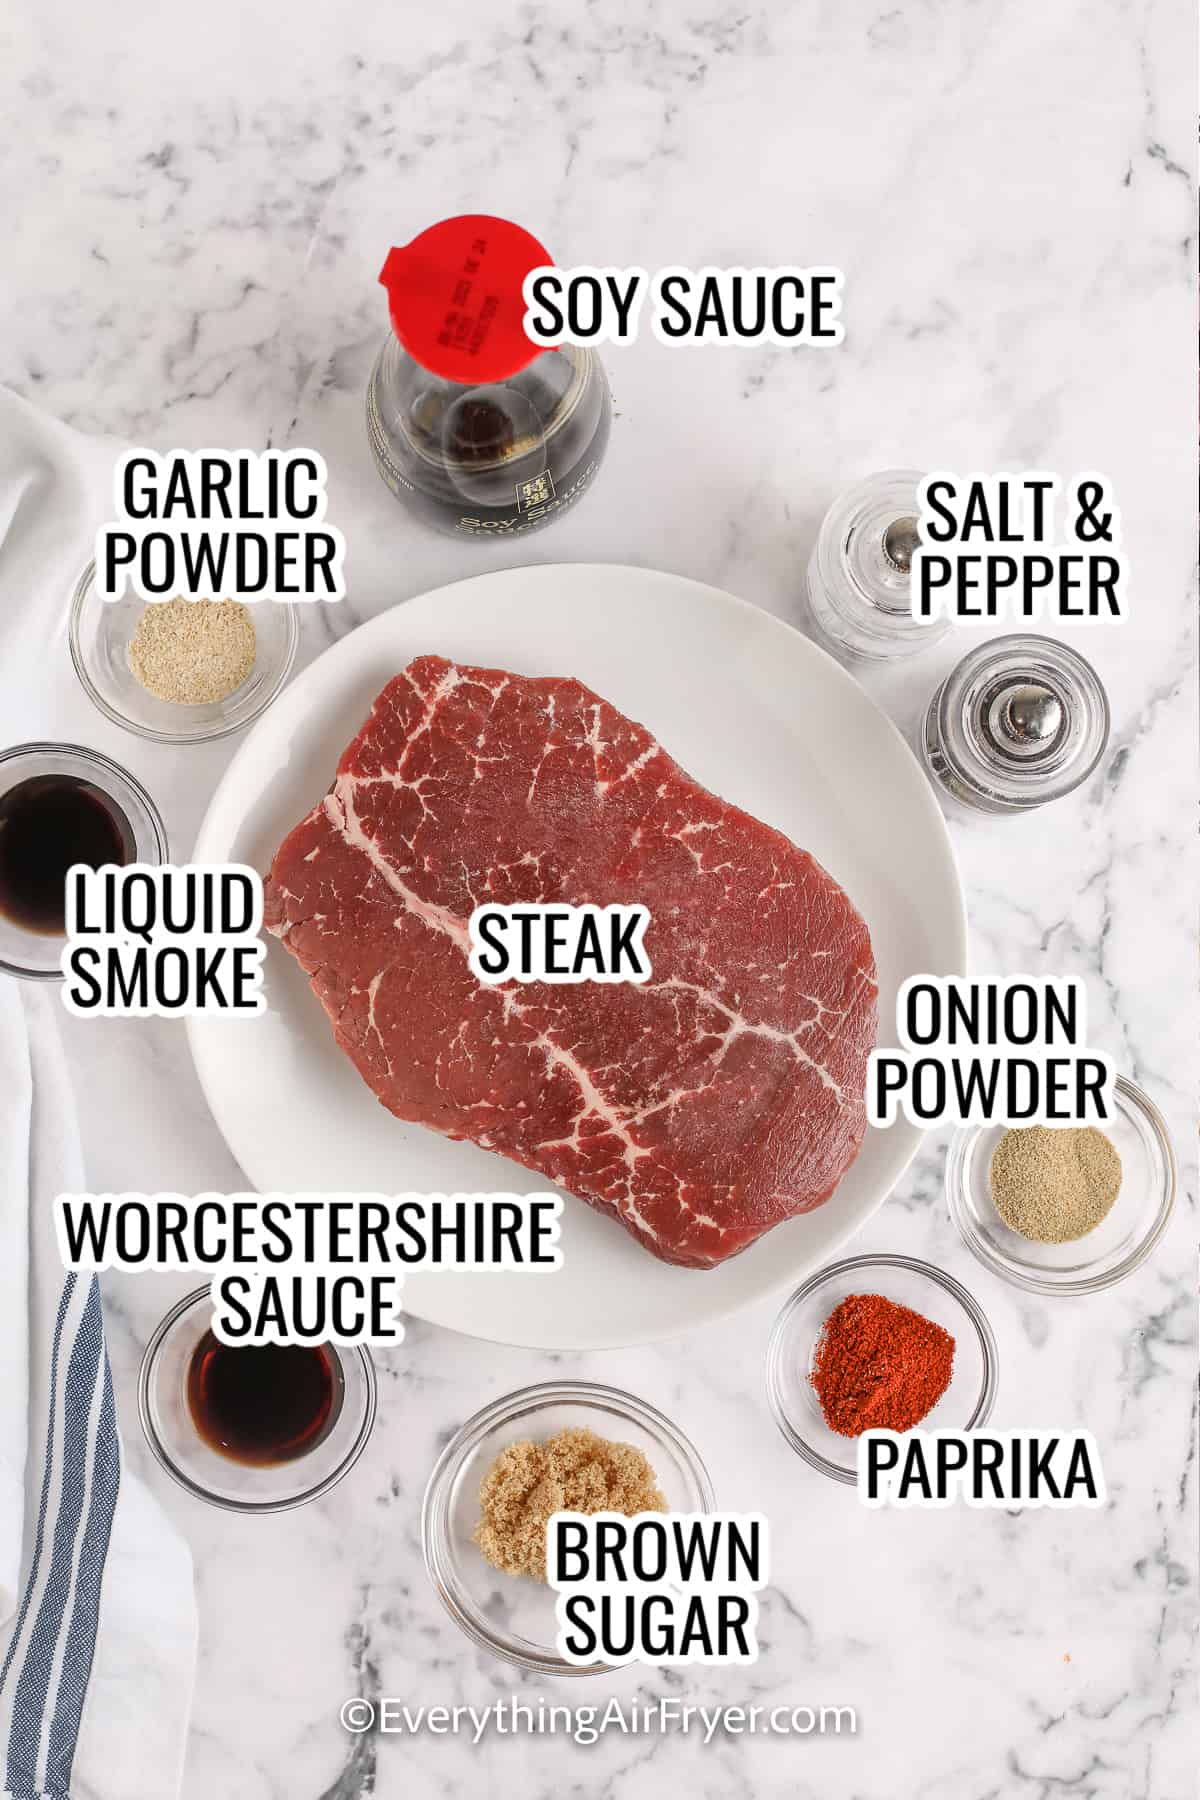 ingredients assembled to make instant vortex air fryer jerky, including steak, soy sauce, garlic powder, worscestershire sauce, onion powder, and paprika